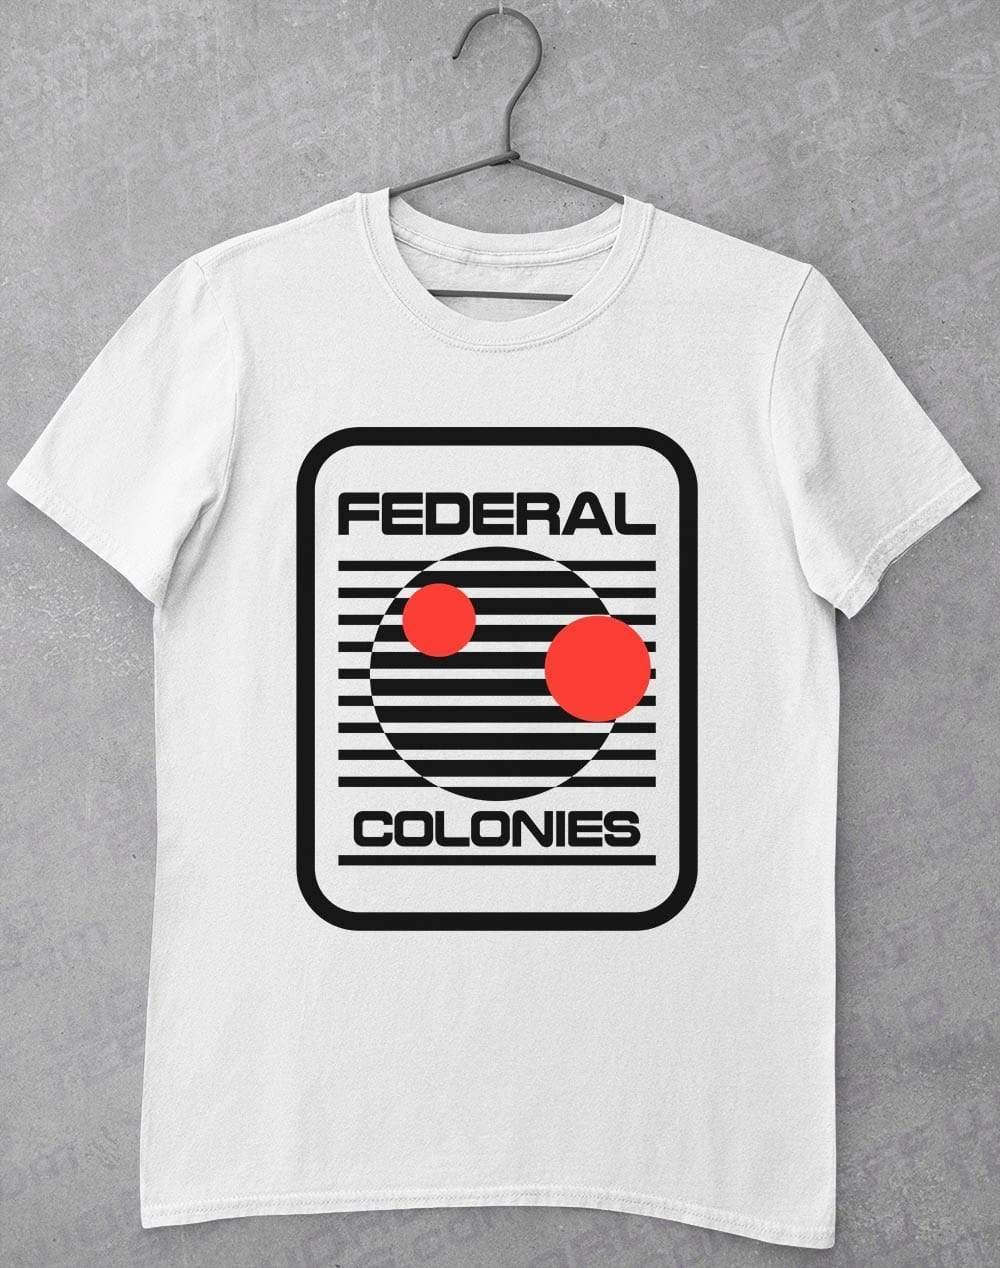 Federal Colonies T-Shirt S / White  - Off World Tees